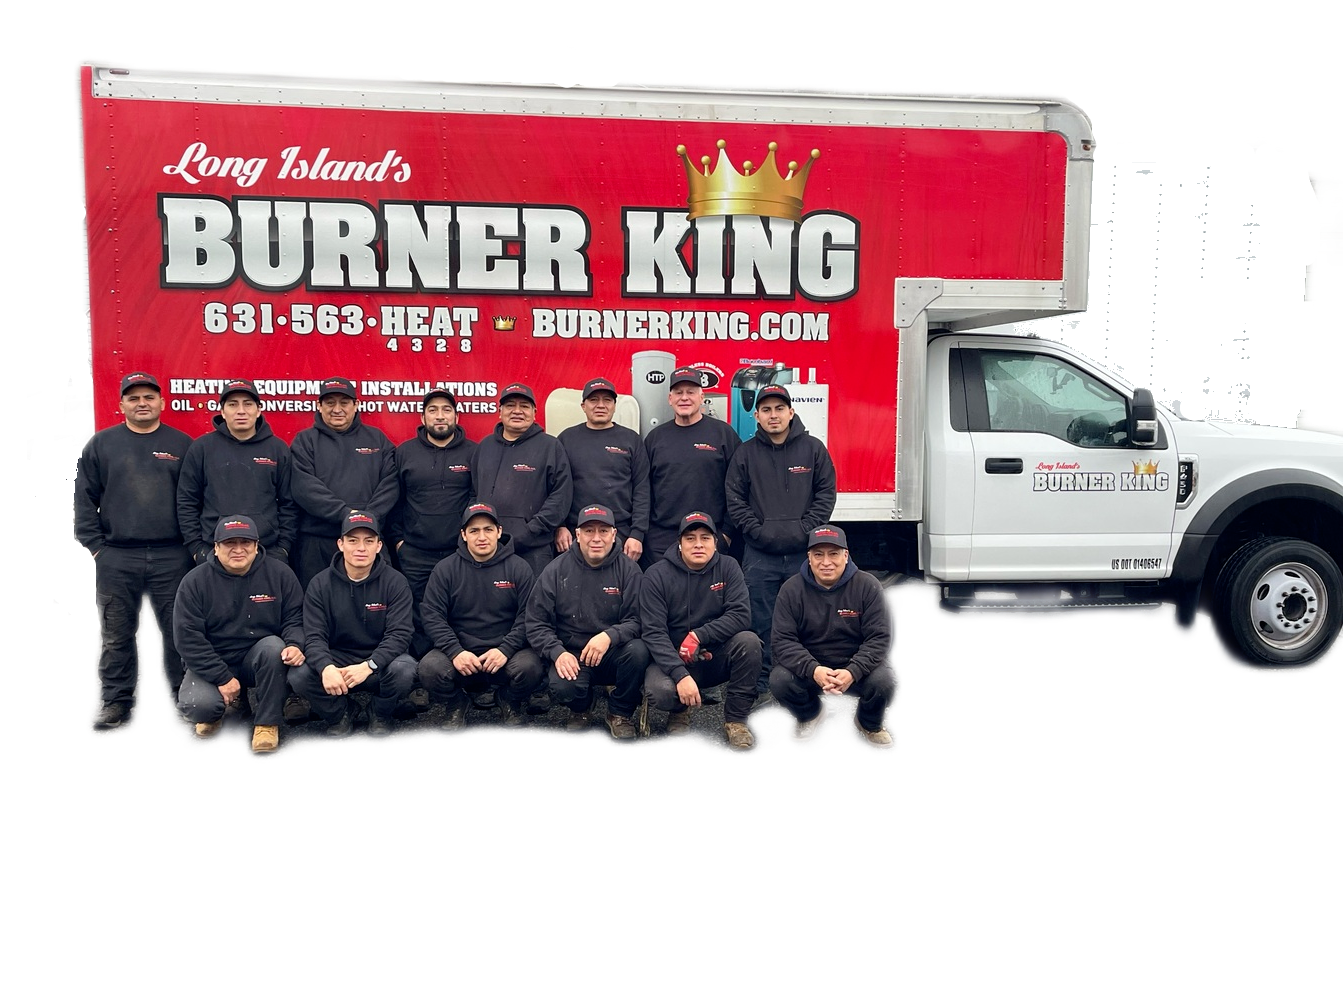 a group of men are posing for a picture in front of a burner king truck .